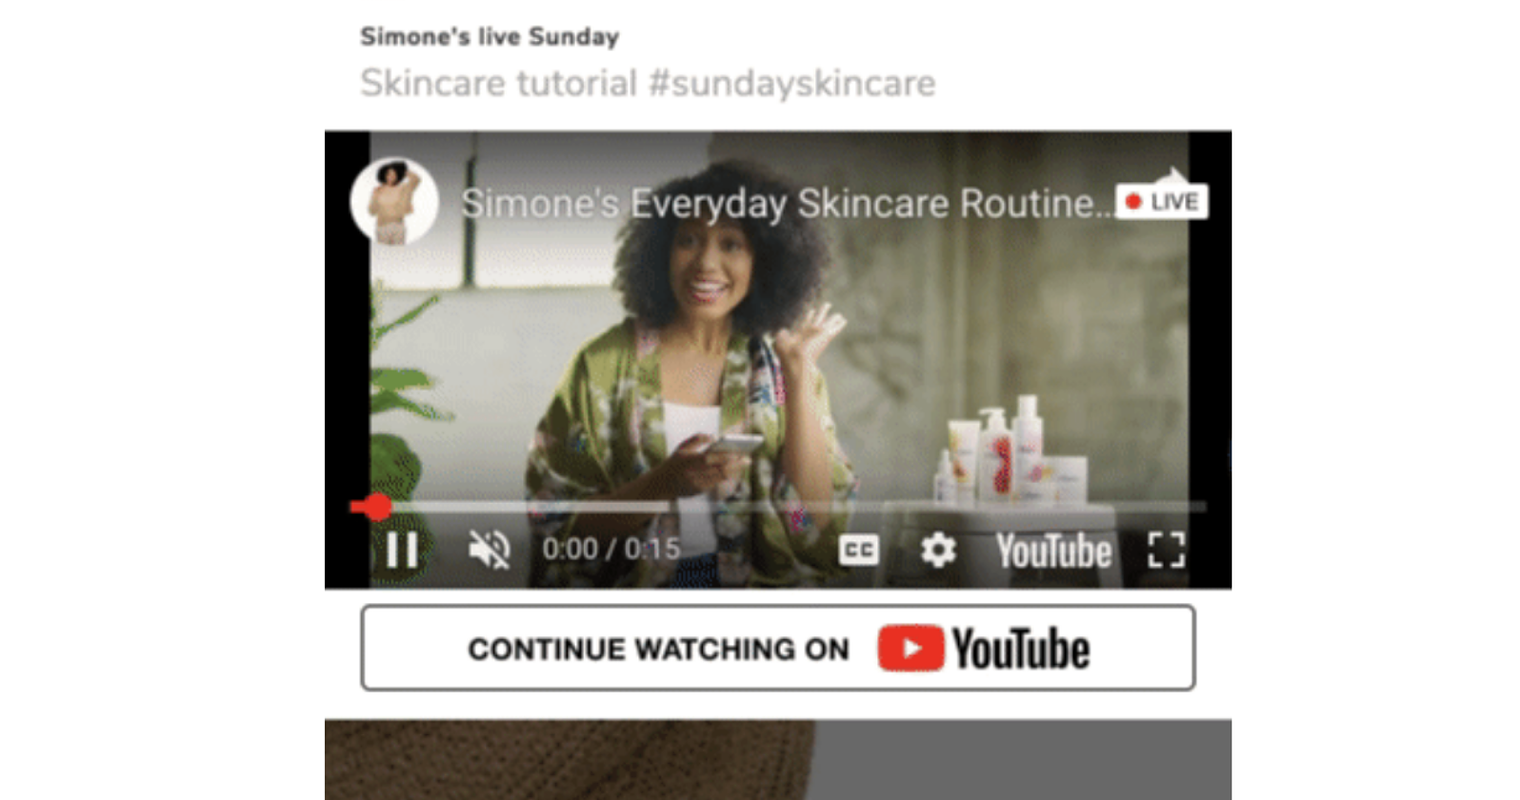 Google Lets Advertisers Promote YouTube Live Streams as Display Ads